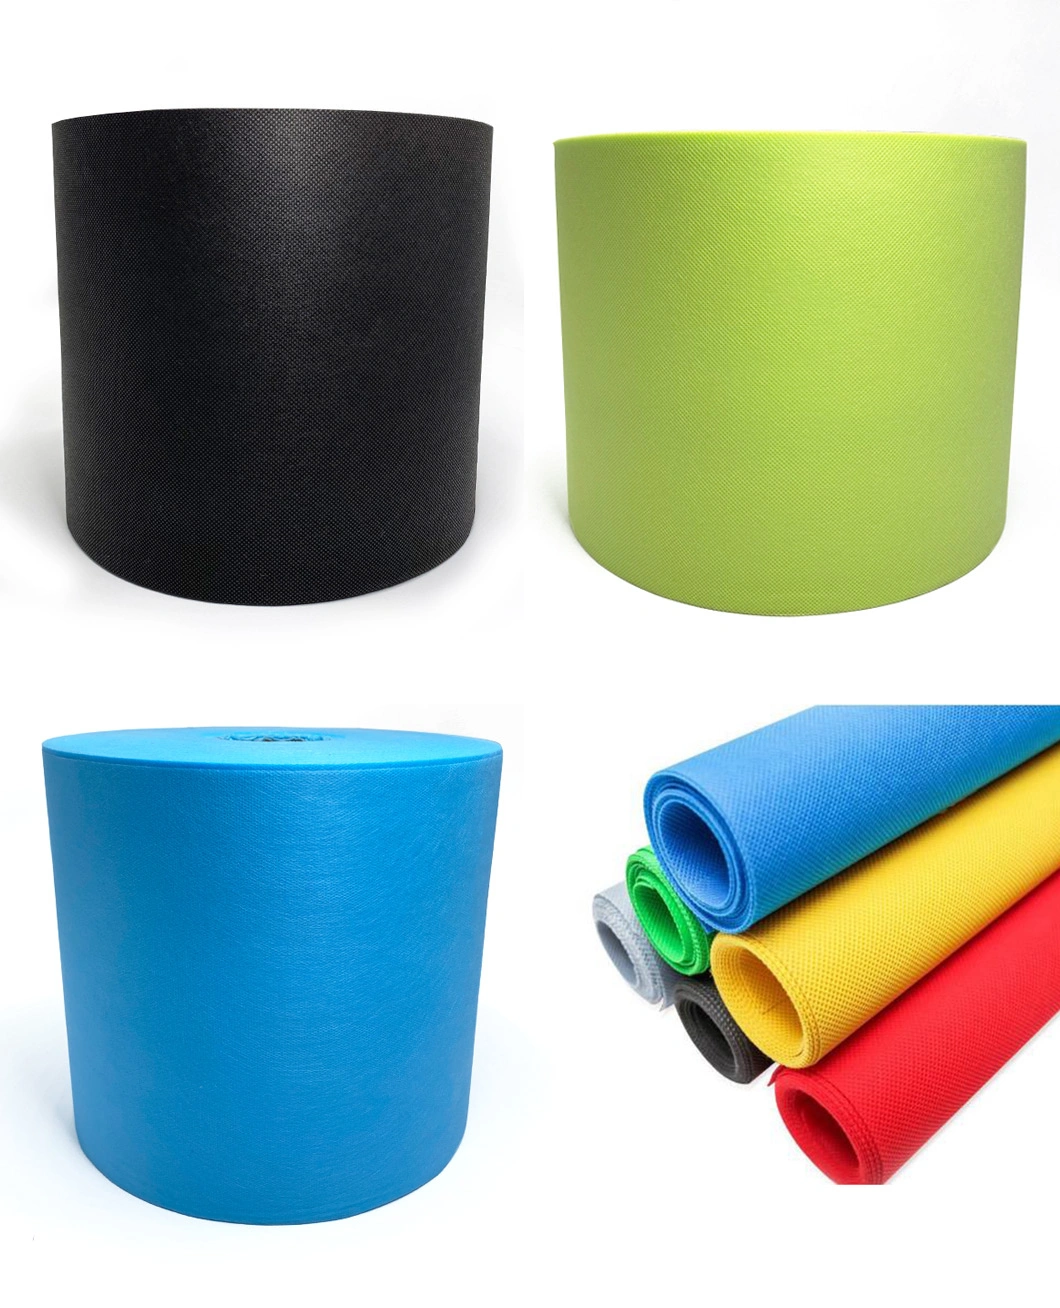 PP Polypropylene Spunbond Nonwoven Fabric TNT Rolls for Packaging Medical Agricultural Industrial &amp; Home Non Woven Fabric